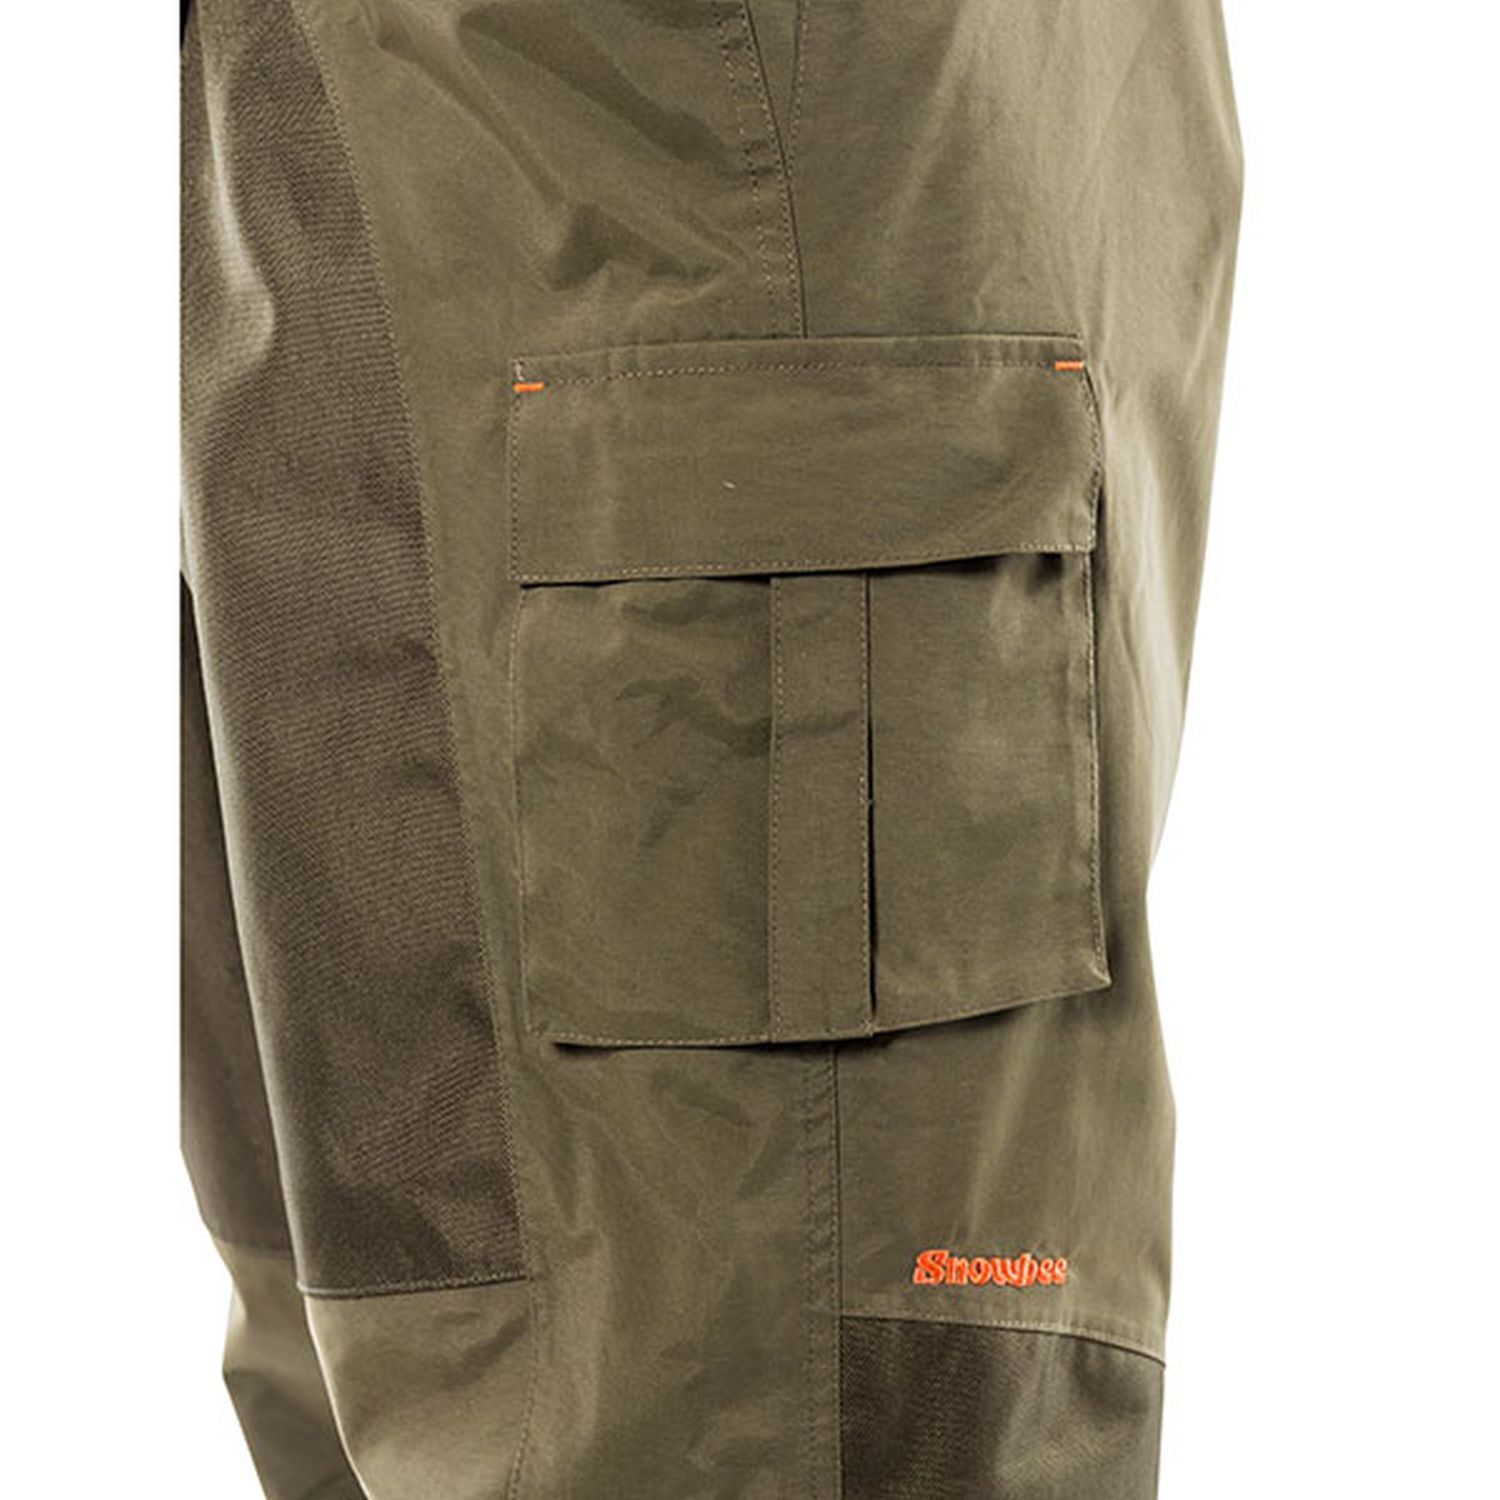 Snowbee Prestige Breathable Over Trousers